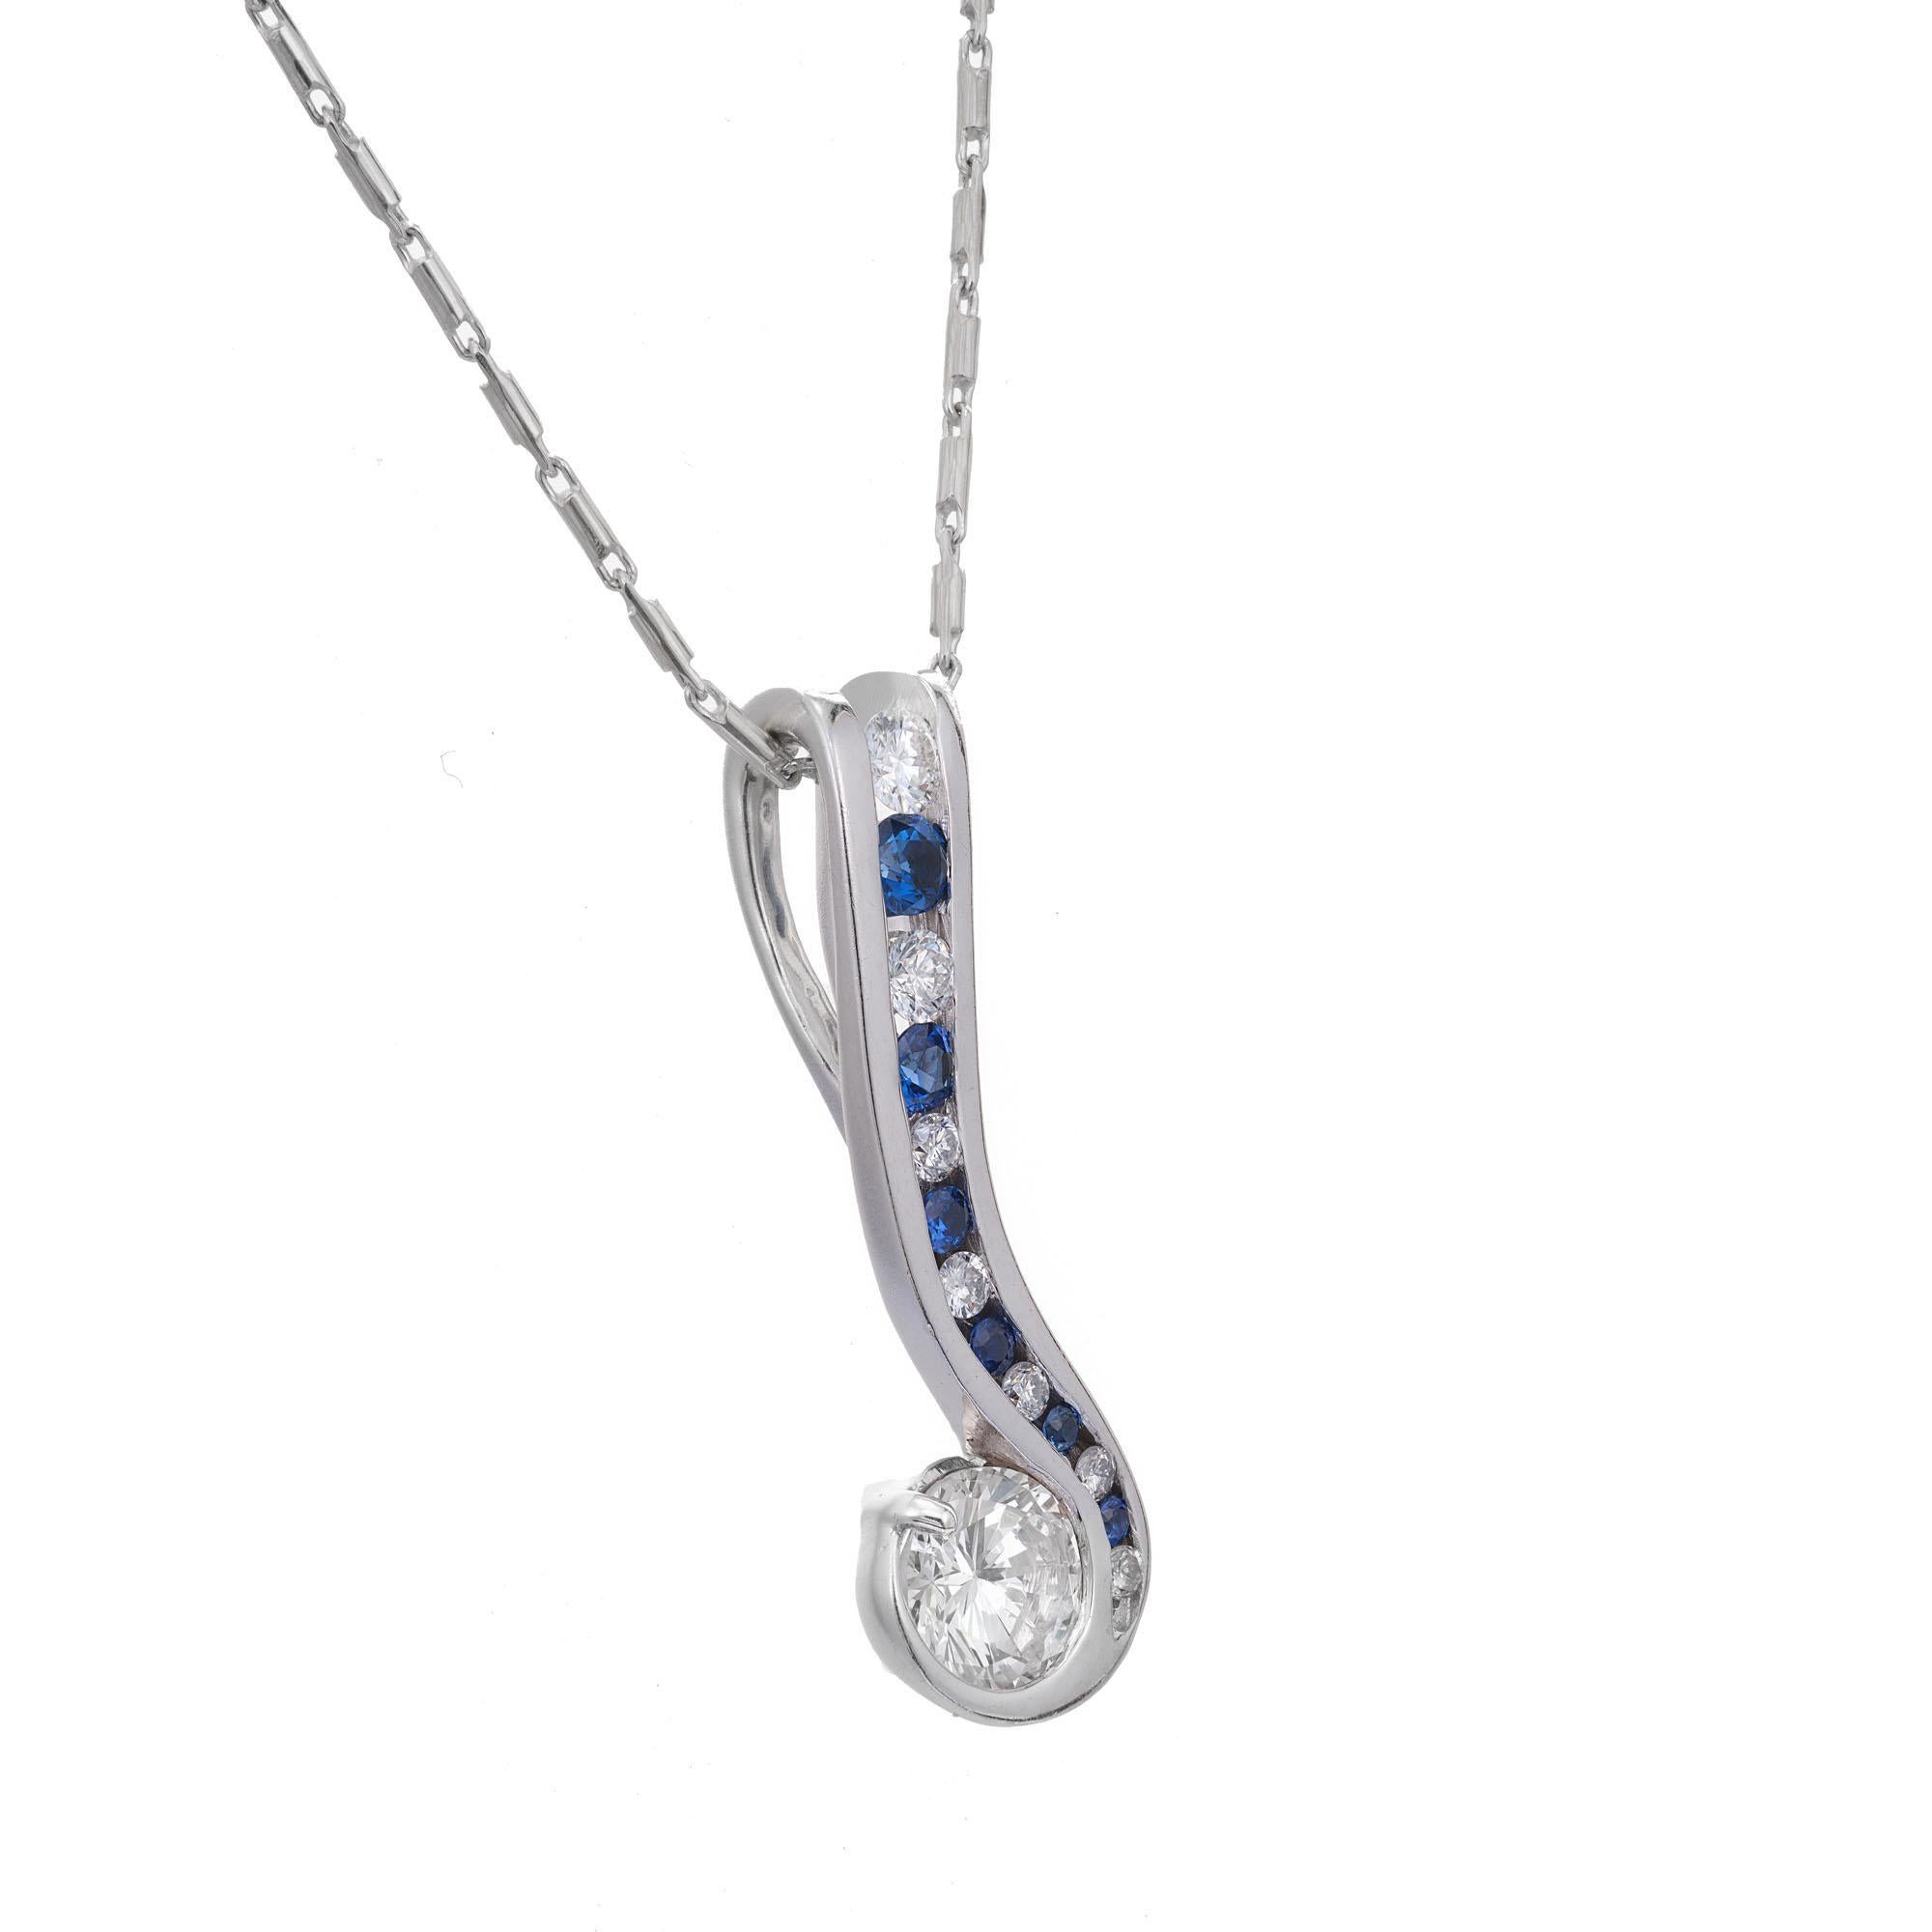 Diamond and sapphire pendant necklace. EGL certified round brilliant cut diamond with channel set round graduated diamonds and sapphires in a 14k white gold swirl pendant necklace. 18 inch chain. 

1 round brilliant cut diamond, approx. total weight